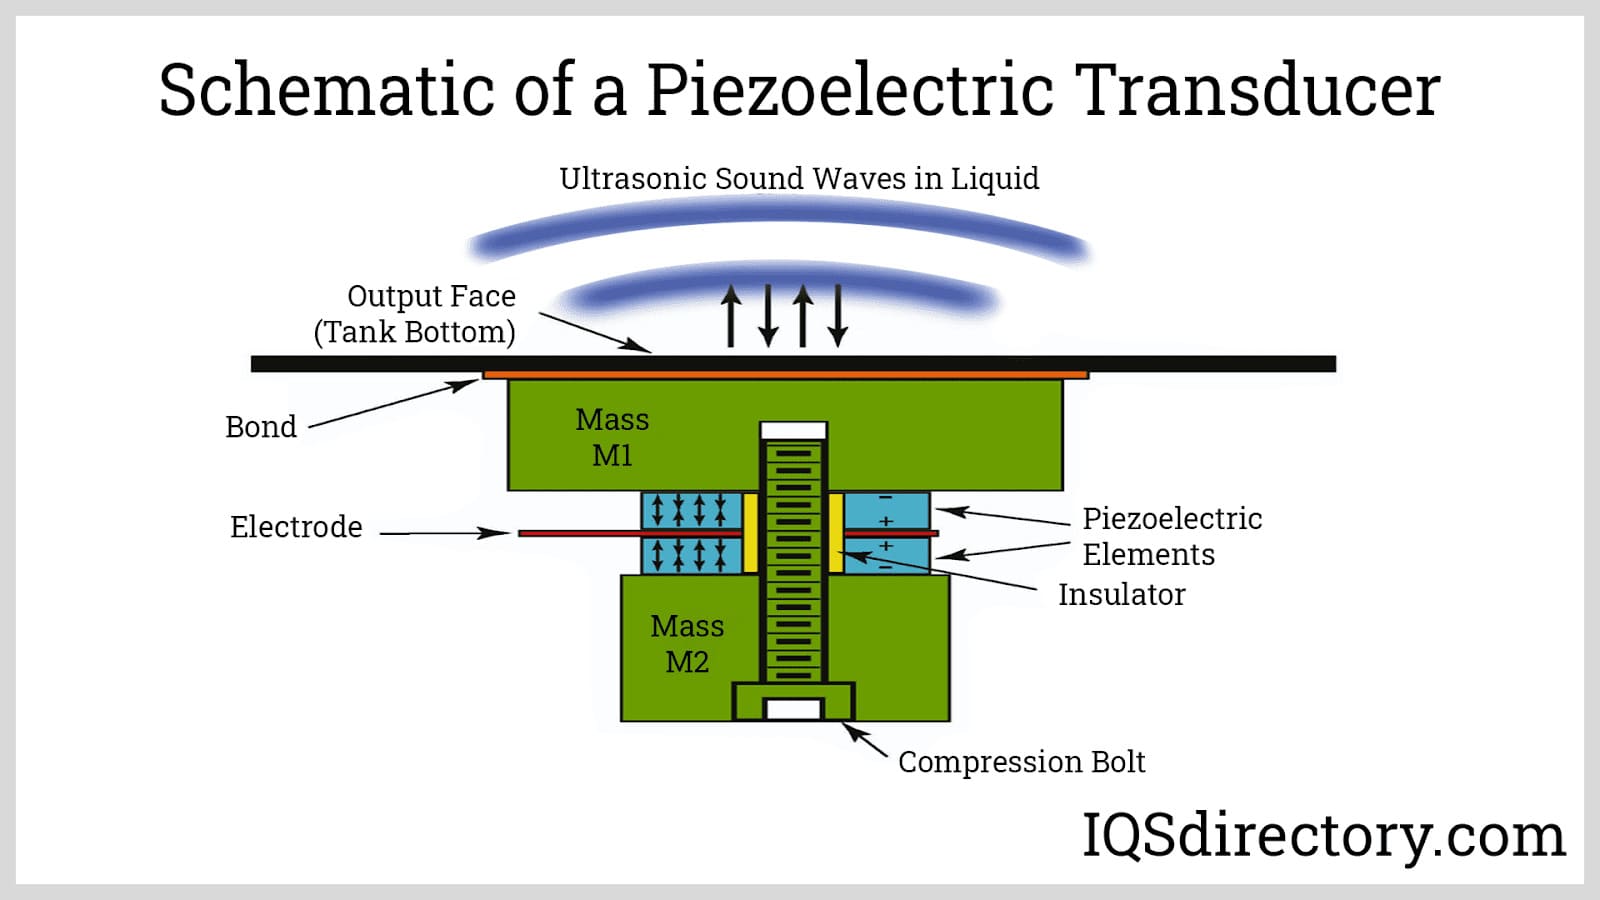 Schematic of a Piezoelectric Transducer